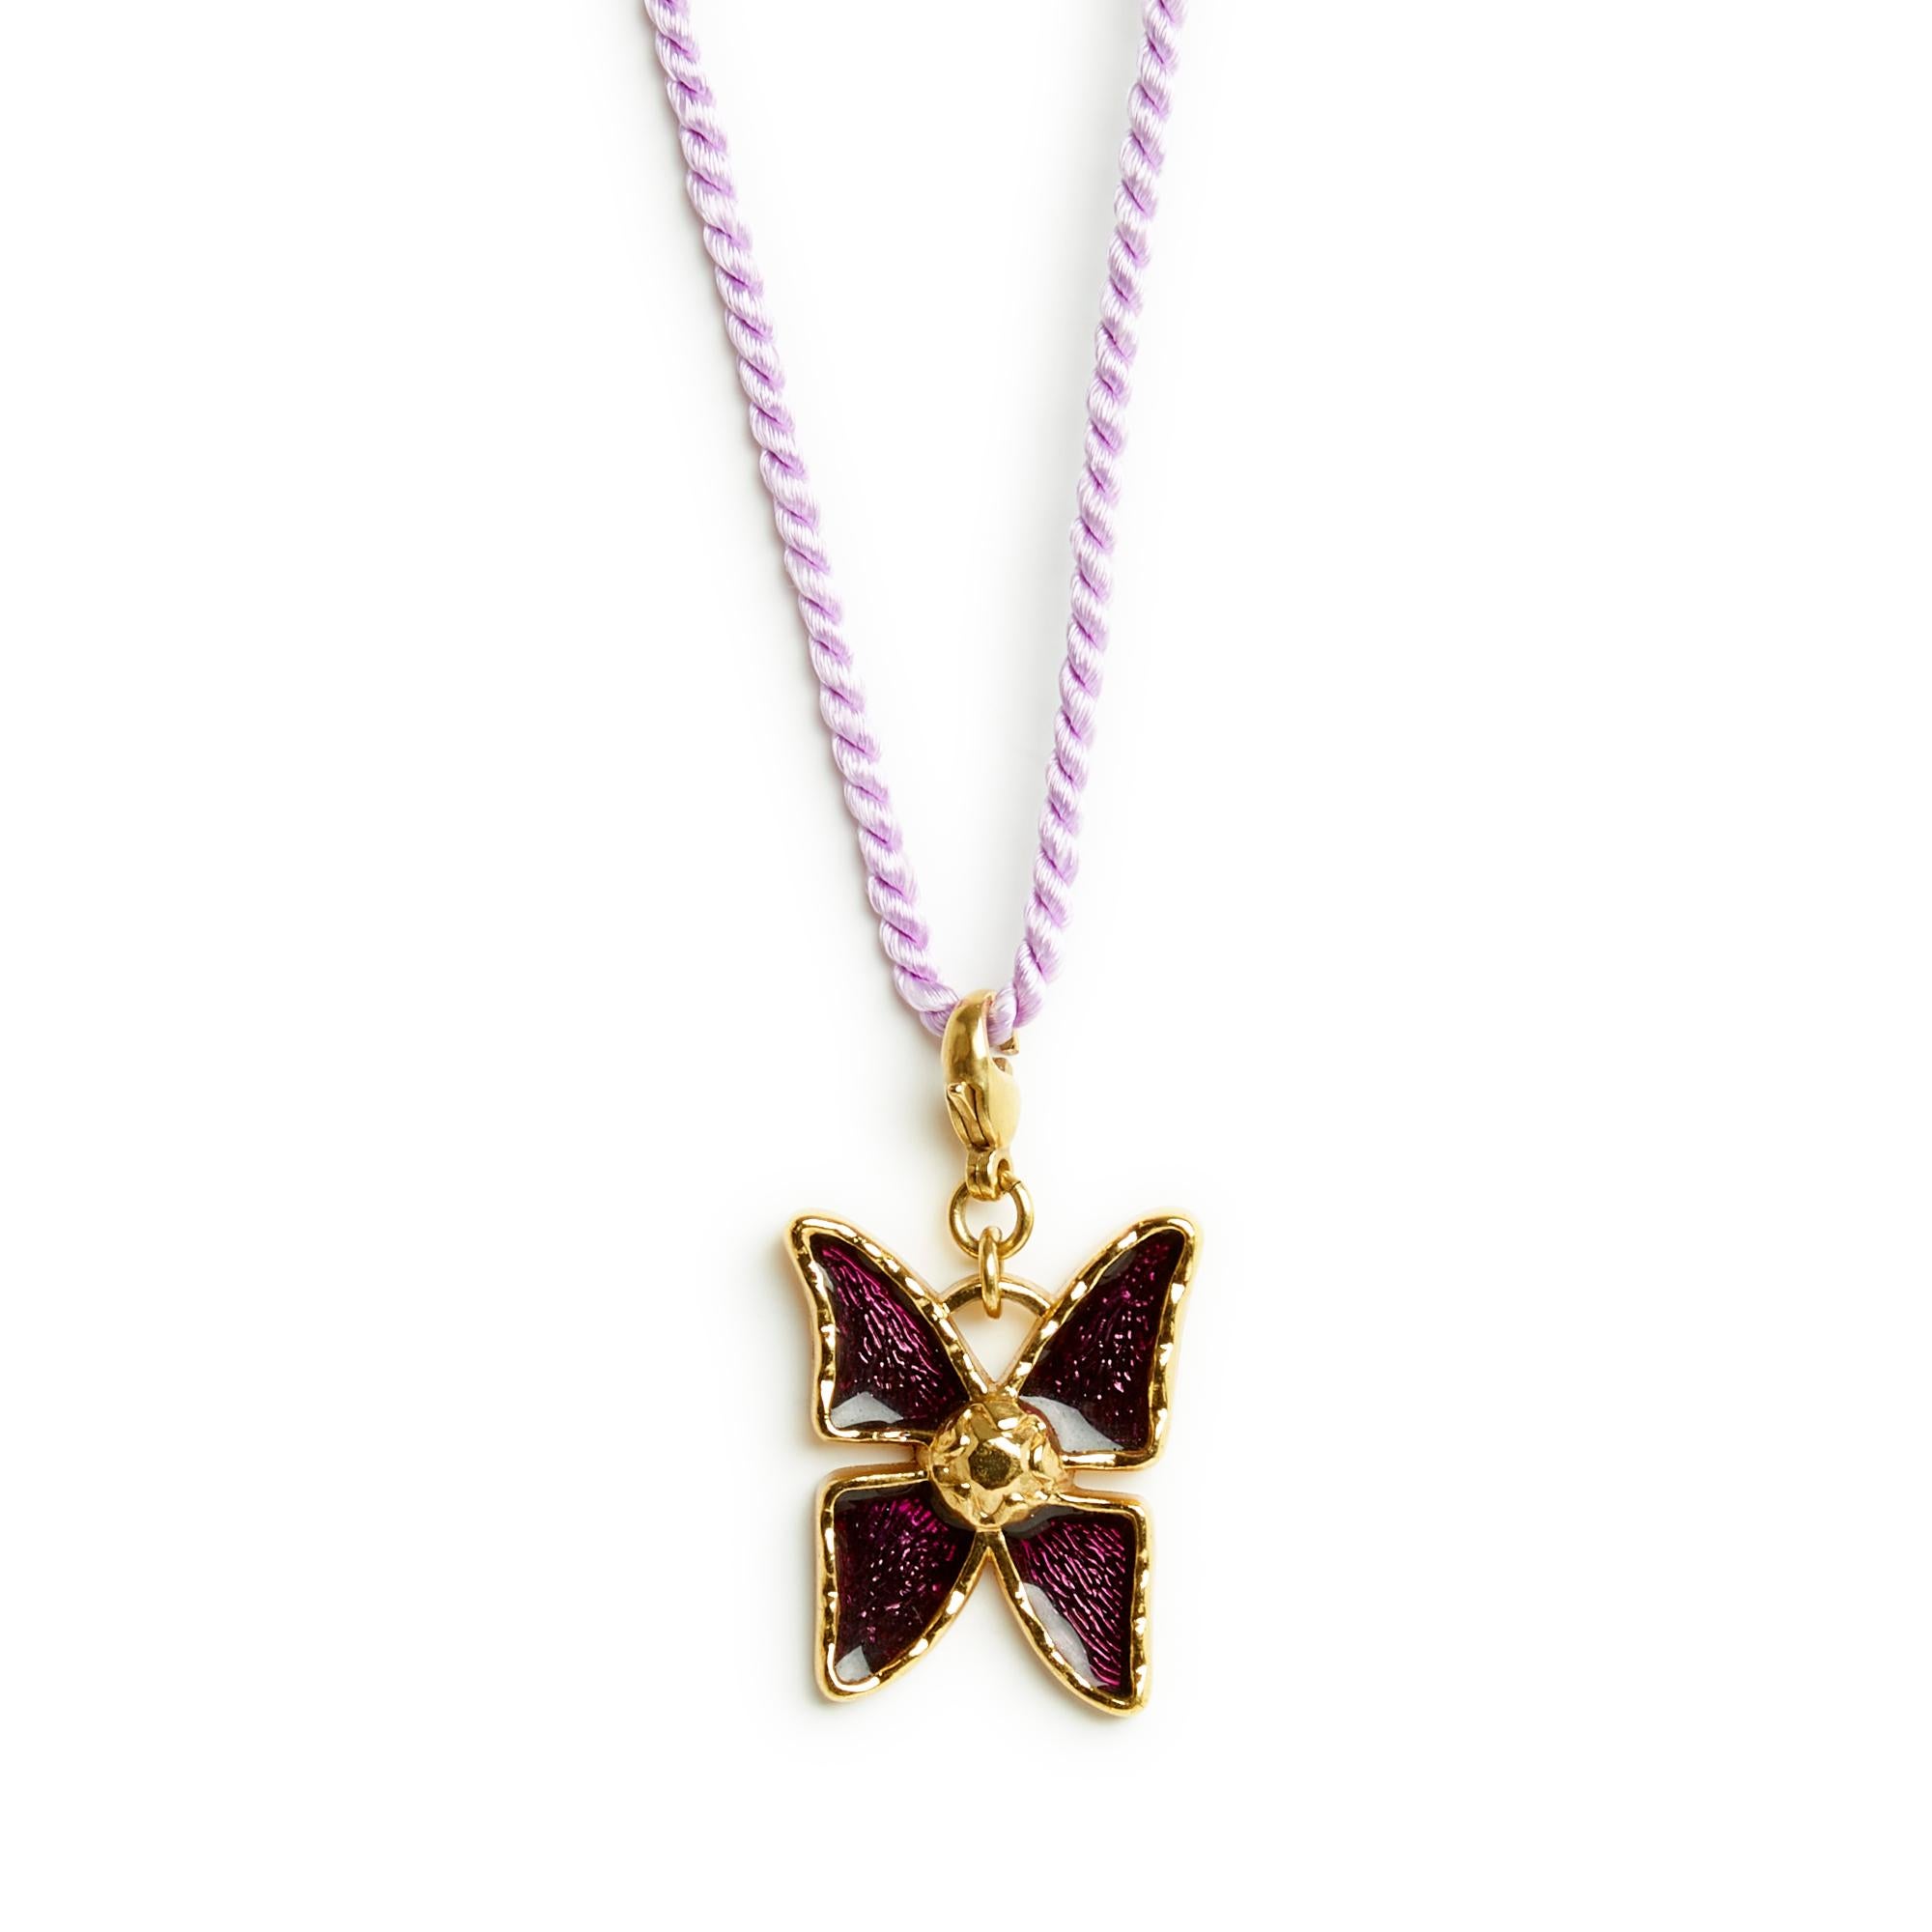 Yves Saint Laurent pendant charm with the motif of a butterfly in gold metal decorated with purple enamel, mounted on a carabiner, signed. Total length 4.4 cm, width 2.7 cm. The pendant is vintage, in very good condition, delivered on a trimmings